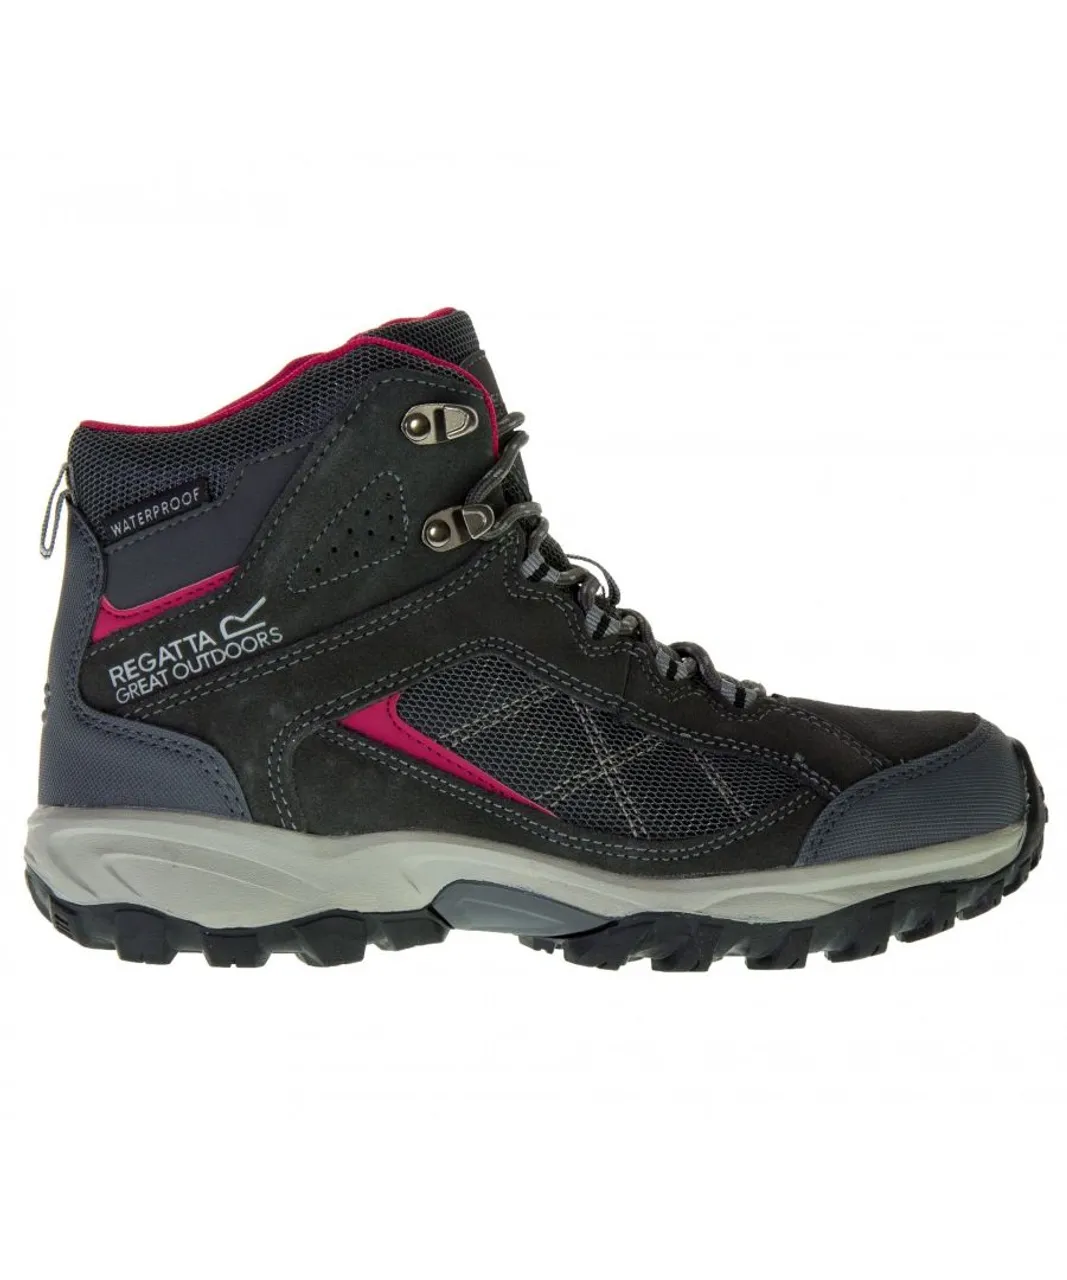 Regatta Great Outdoors Womens/Ladies Lady Clydebank Waterproof Hiking Boots - Multicolour